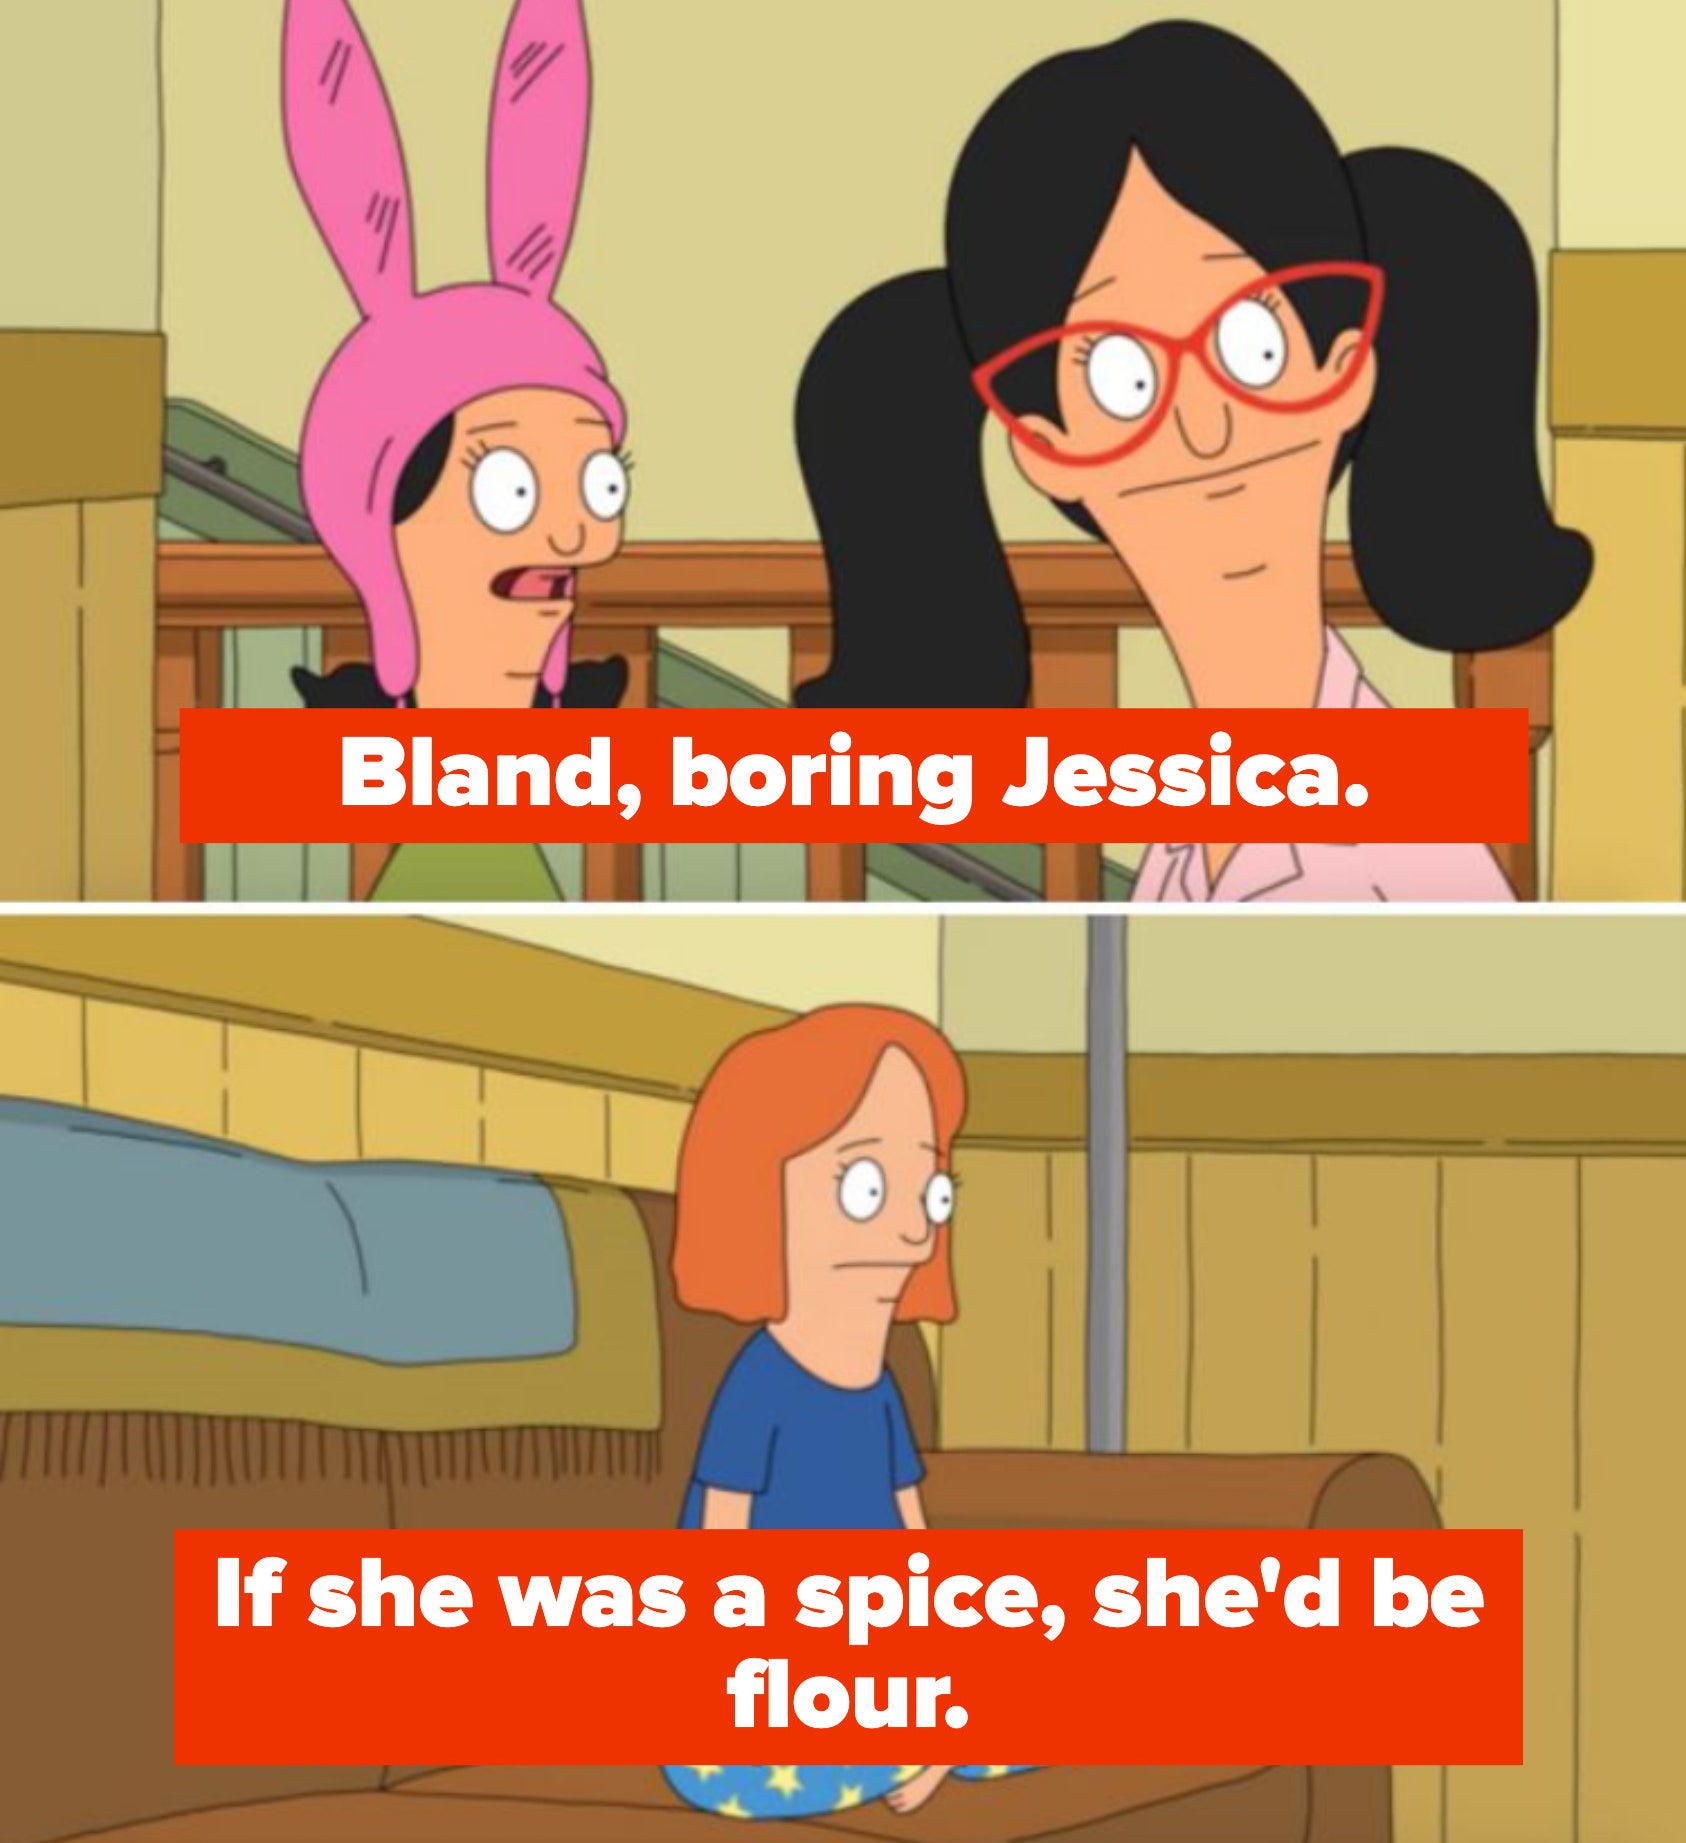 &quot;Bland, boring Jessica. If she was a spice, she&#x27;d be flour&quot;